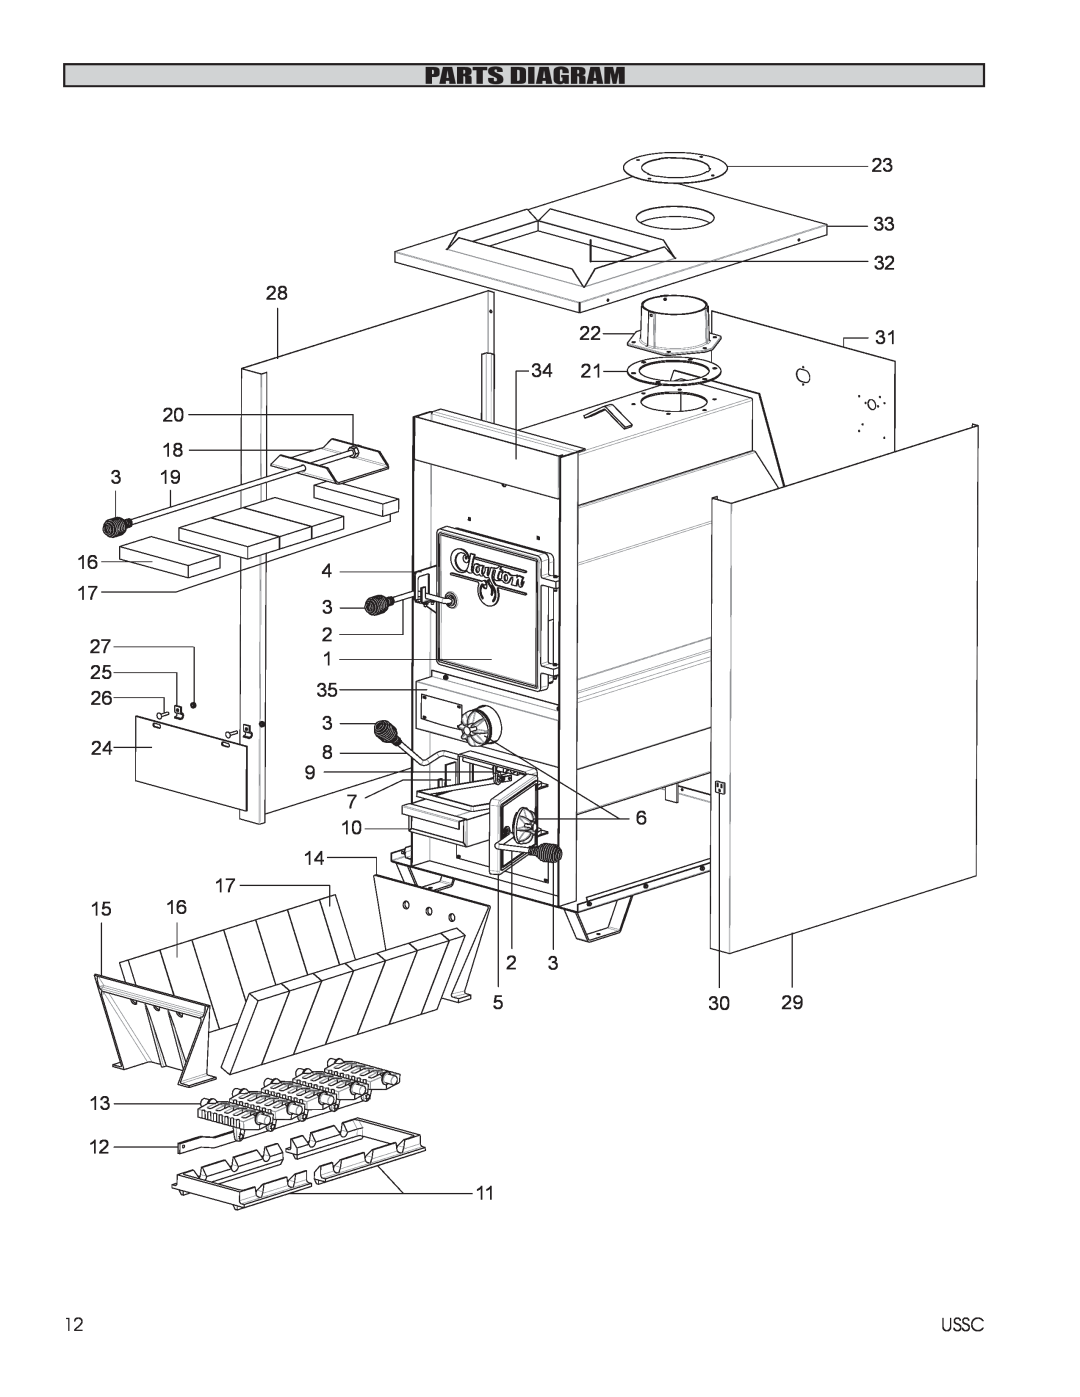 United States Stove 1602M installation instructions Parts Diagram, 20 18 3 16 17 27, 28 4 